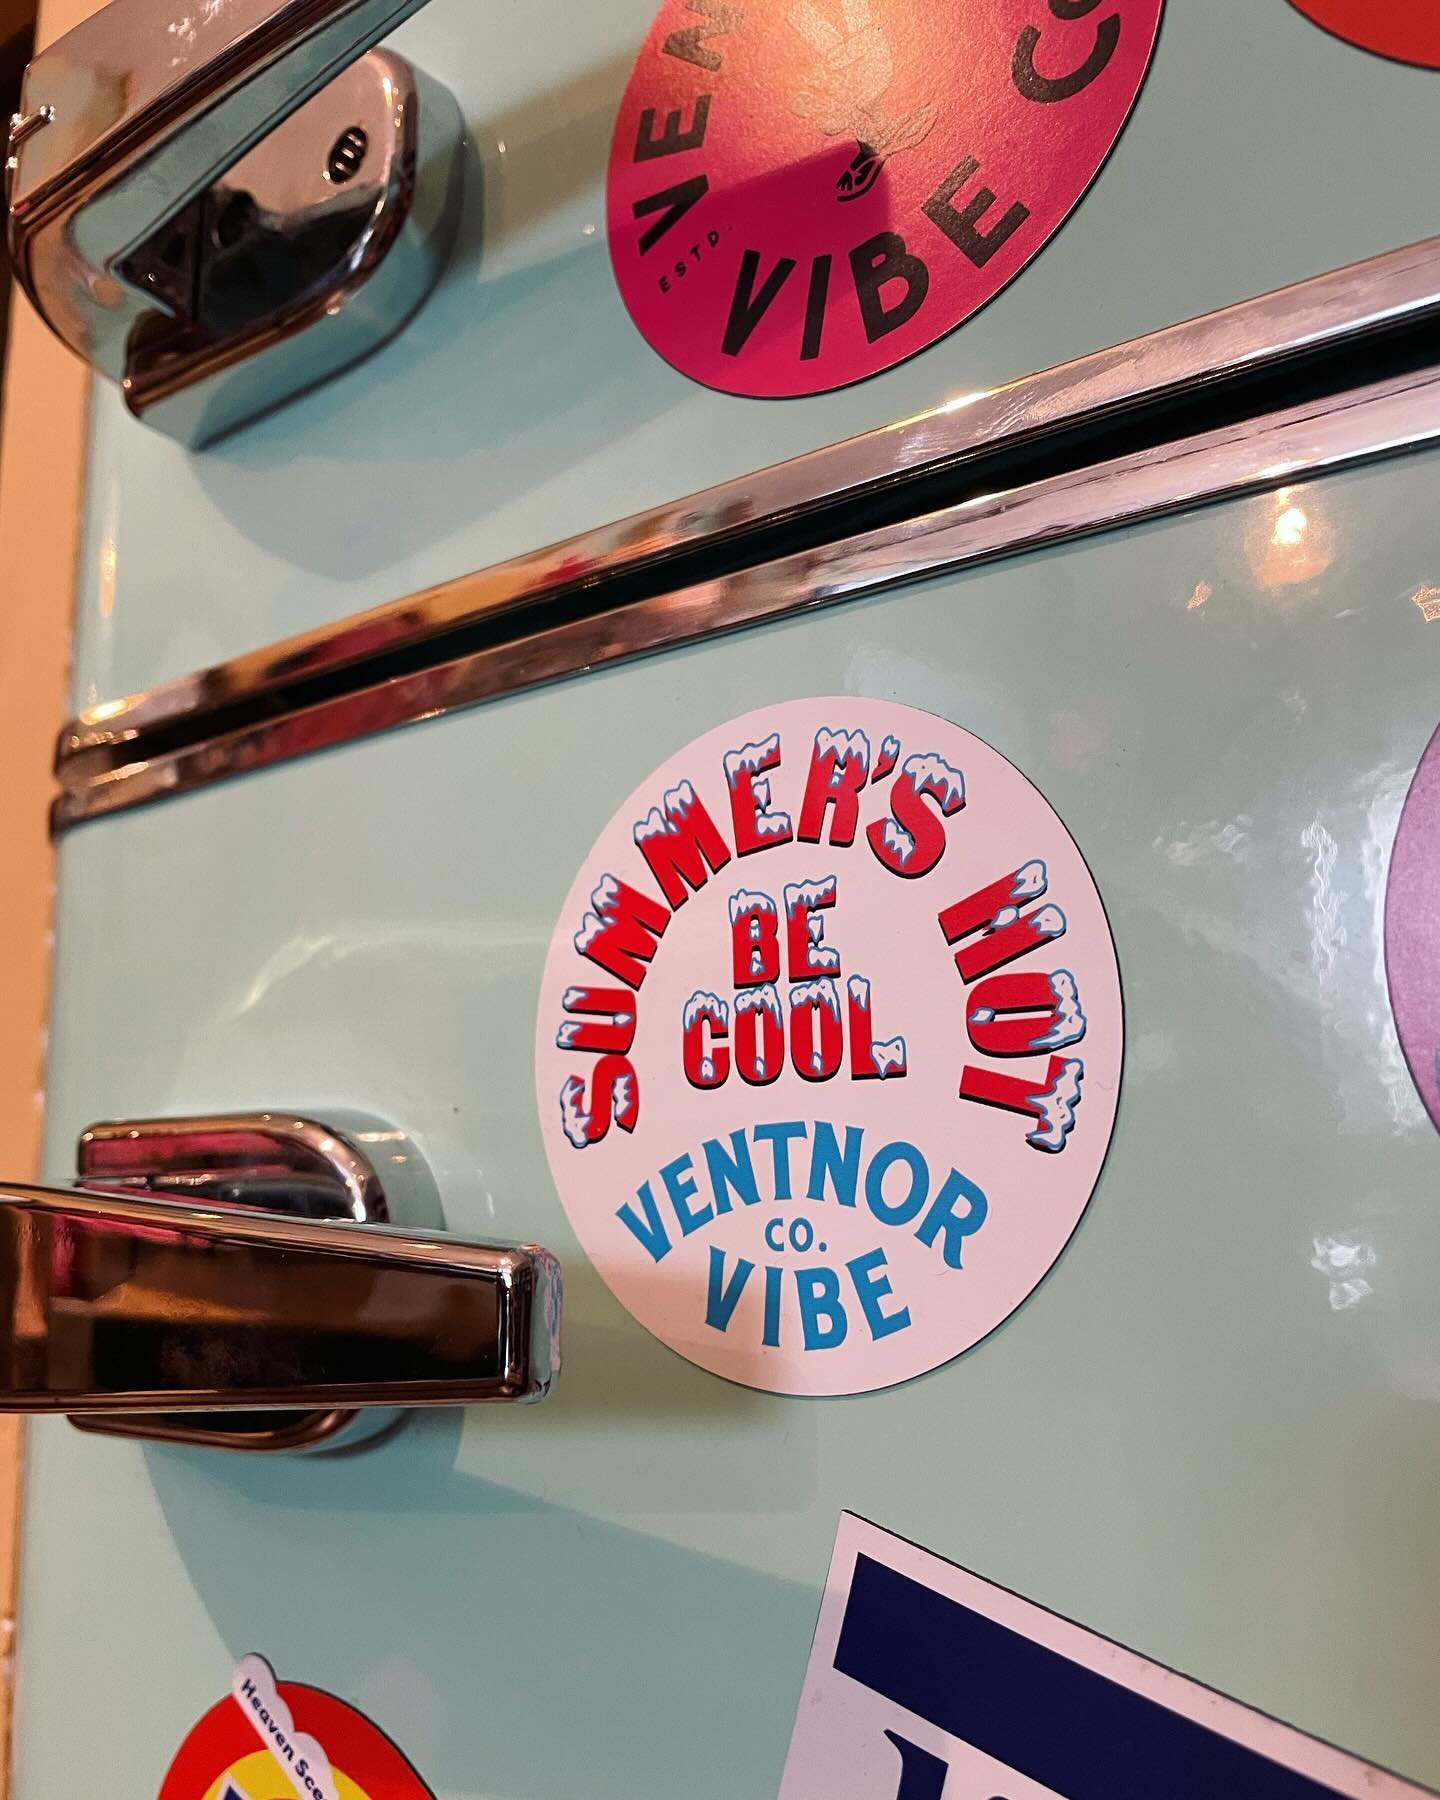 New magnets, same old vibes. Just 46 days &lsquo;til the end of 46 degree weather. See ya soon Ventnor ✌️